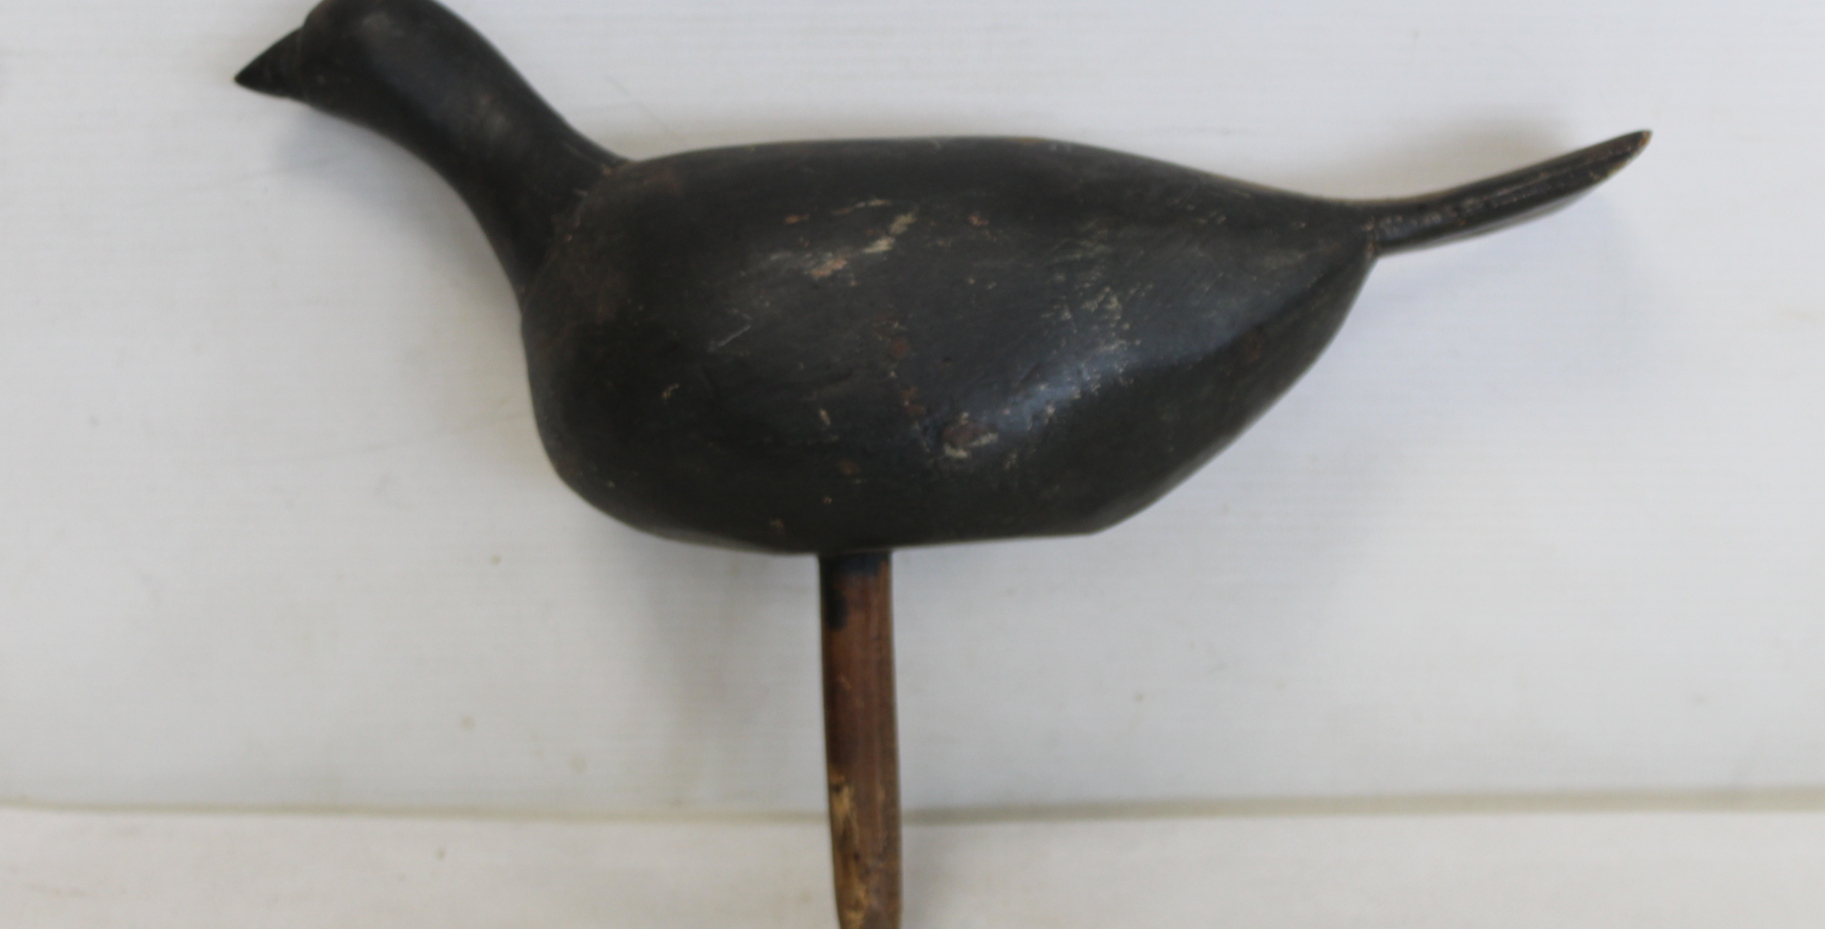 Antique wooden bird decoy with grey painted finish and peg base, 23.5cm high and 31cm long.